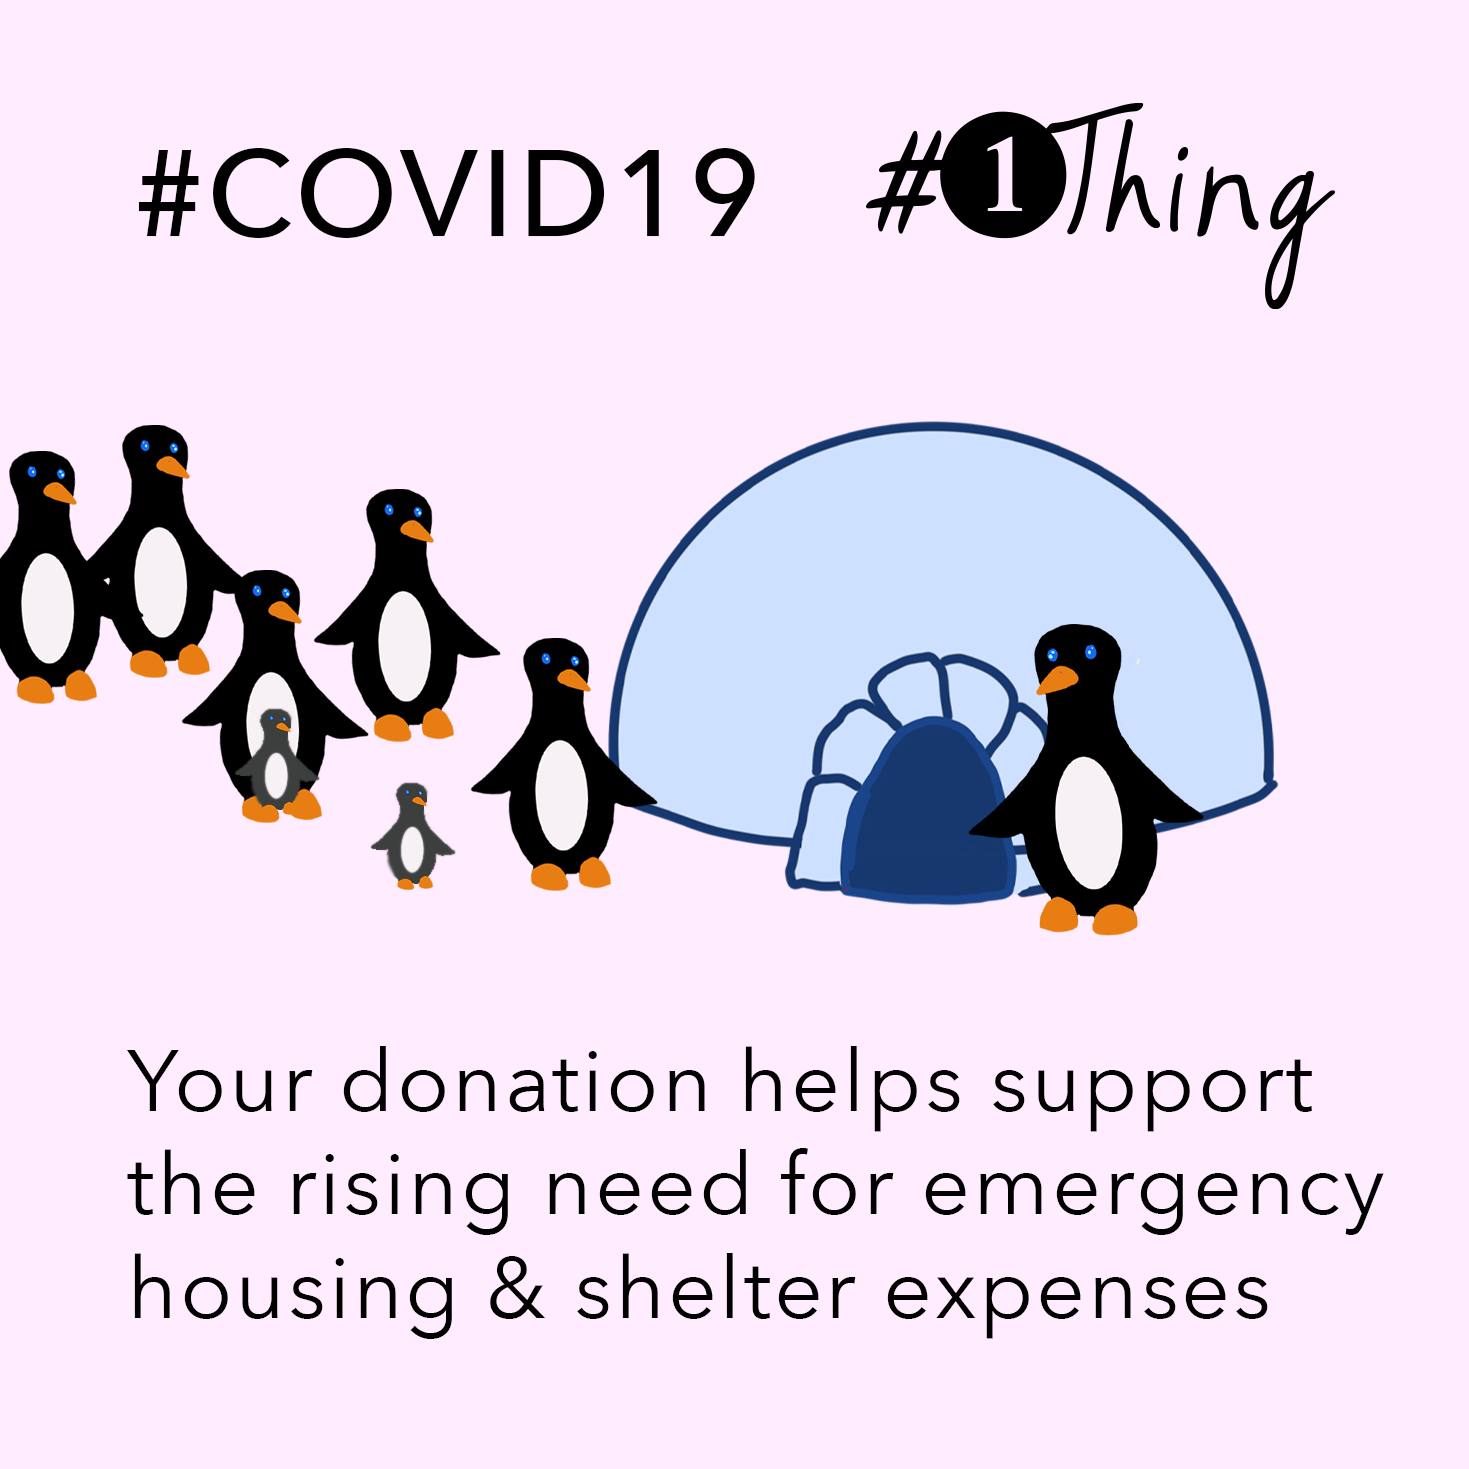 Your donation helps support the rising need for emergency housing & shelter expenses.